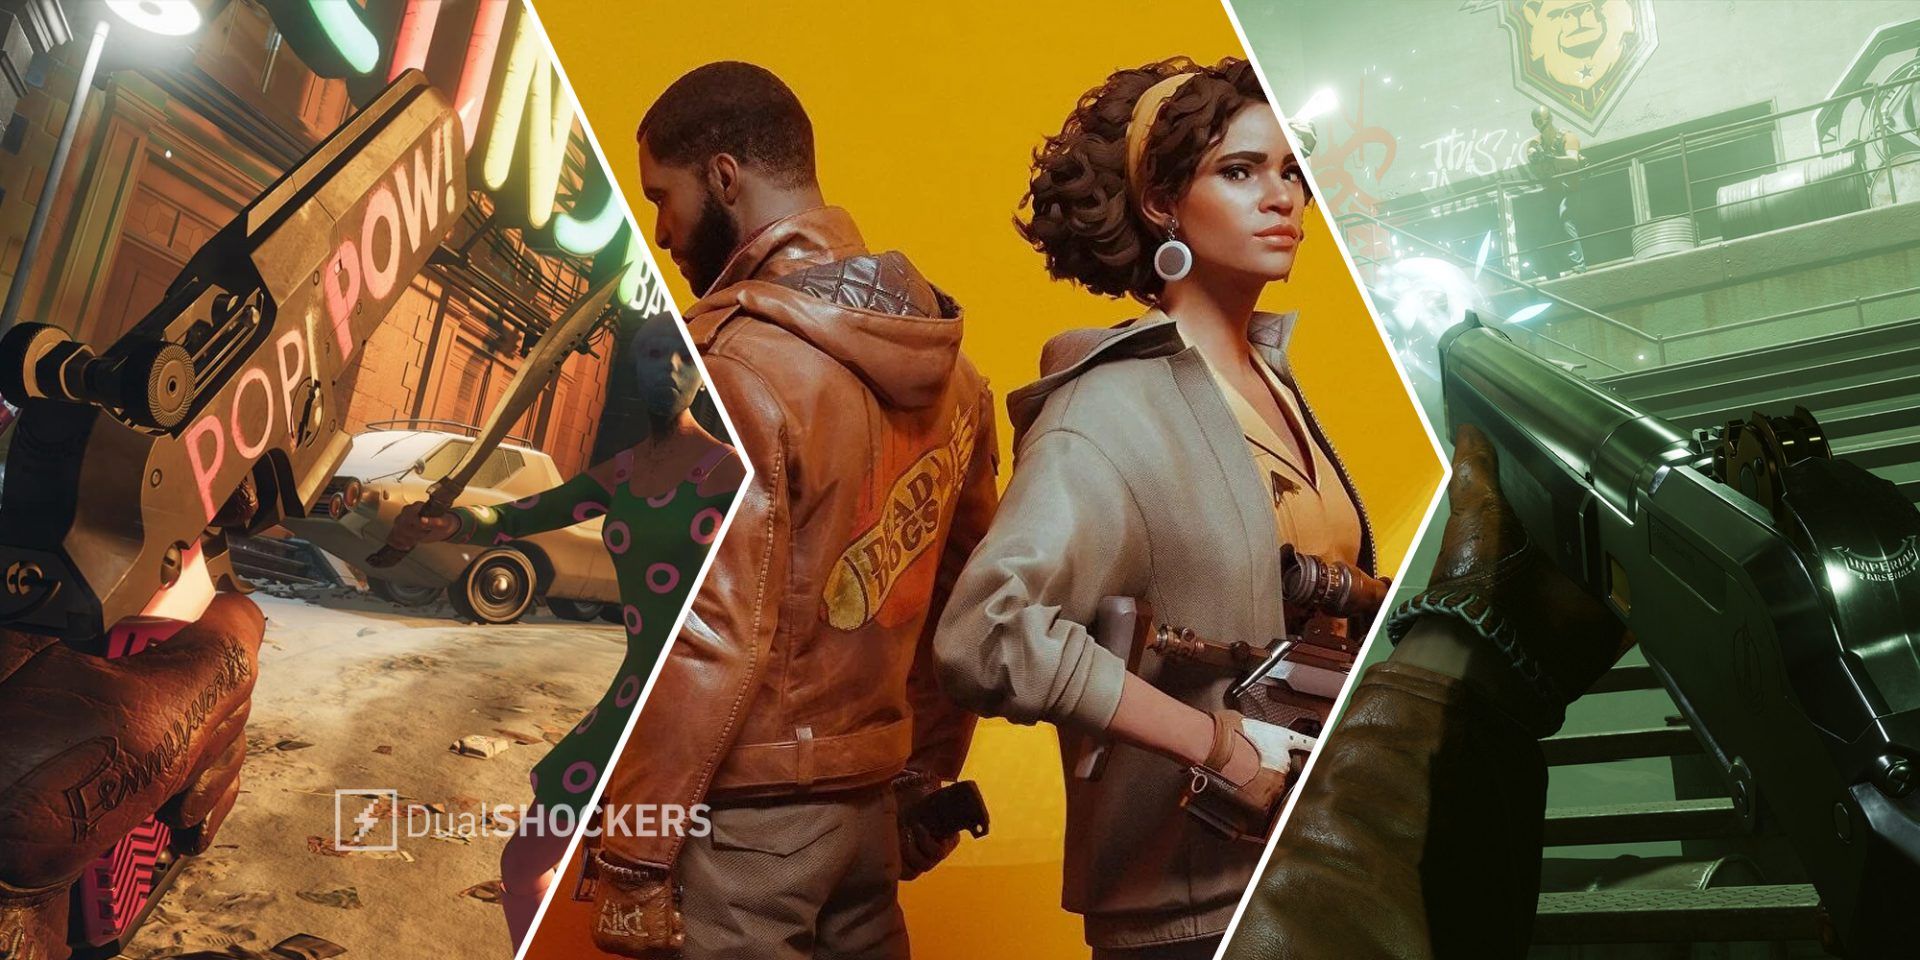 Deathloop player with pistol on left, Deathloop promo image with Colt Vahn and Julianna Blake in middle, player with gun on right